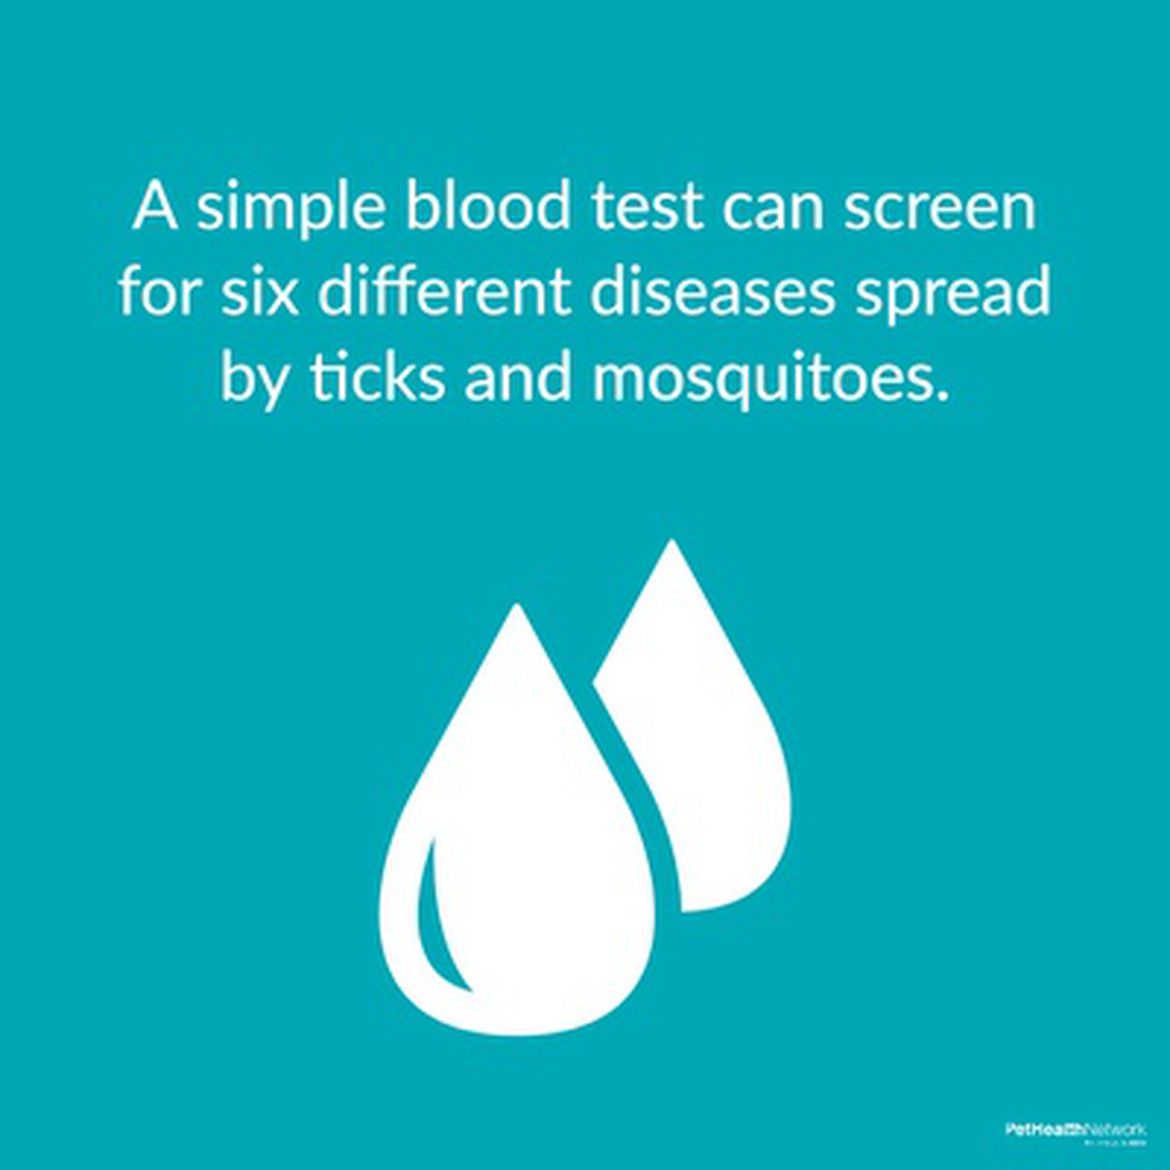 Social media post about how how a test can screen for diseases spread by mosquitoes and ticks.